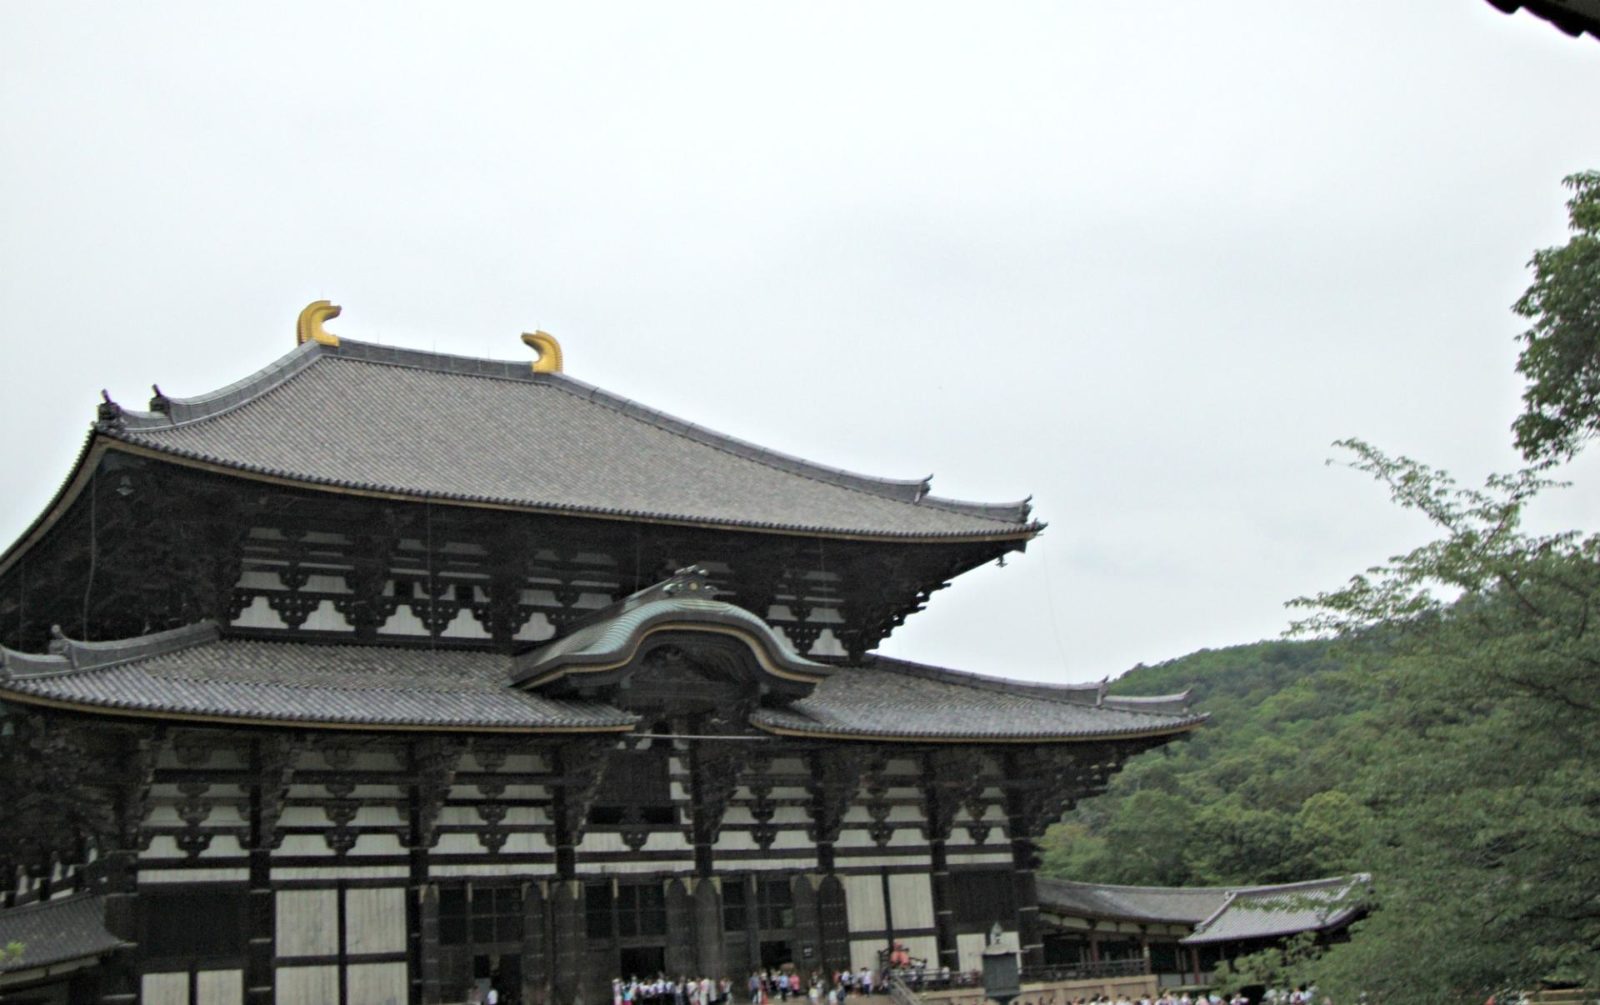 Nara Travel Guide: Todaiji Temple is the largest wooden building in the world